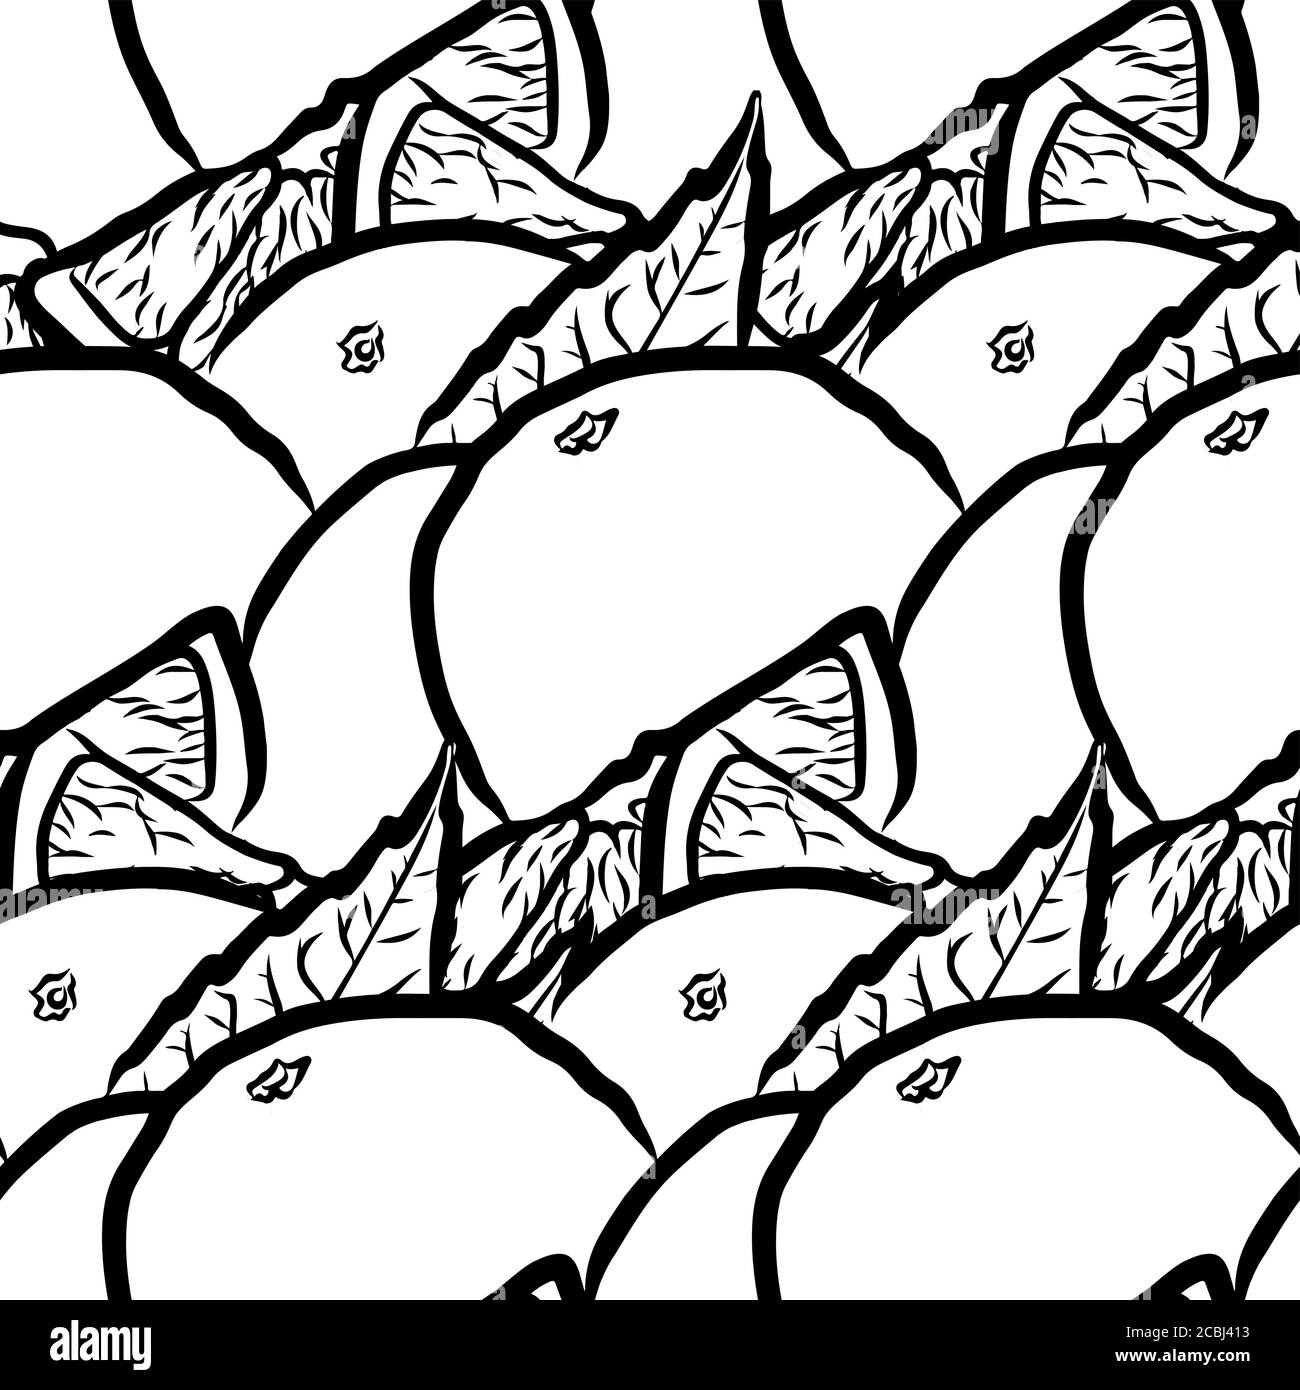 Handdrawn Oranges seamless pattern. Black and white hand drawn illustration. Icon sign for print and labelling. Stock Vector